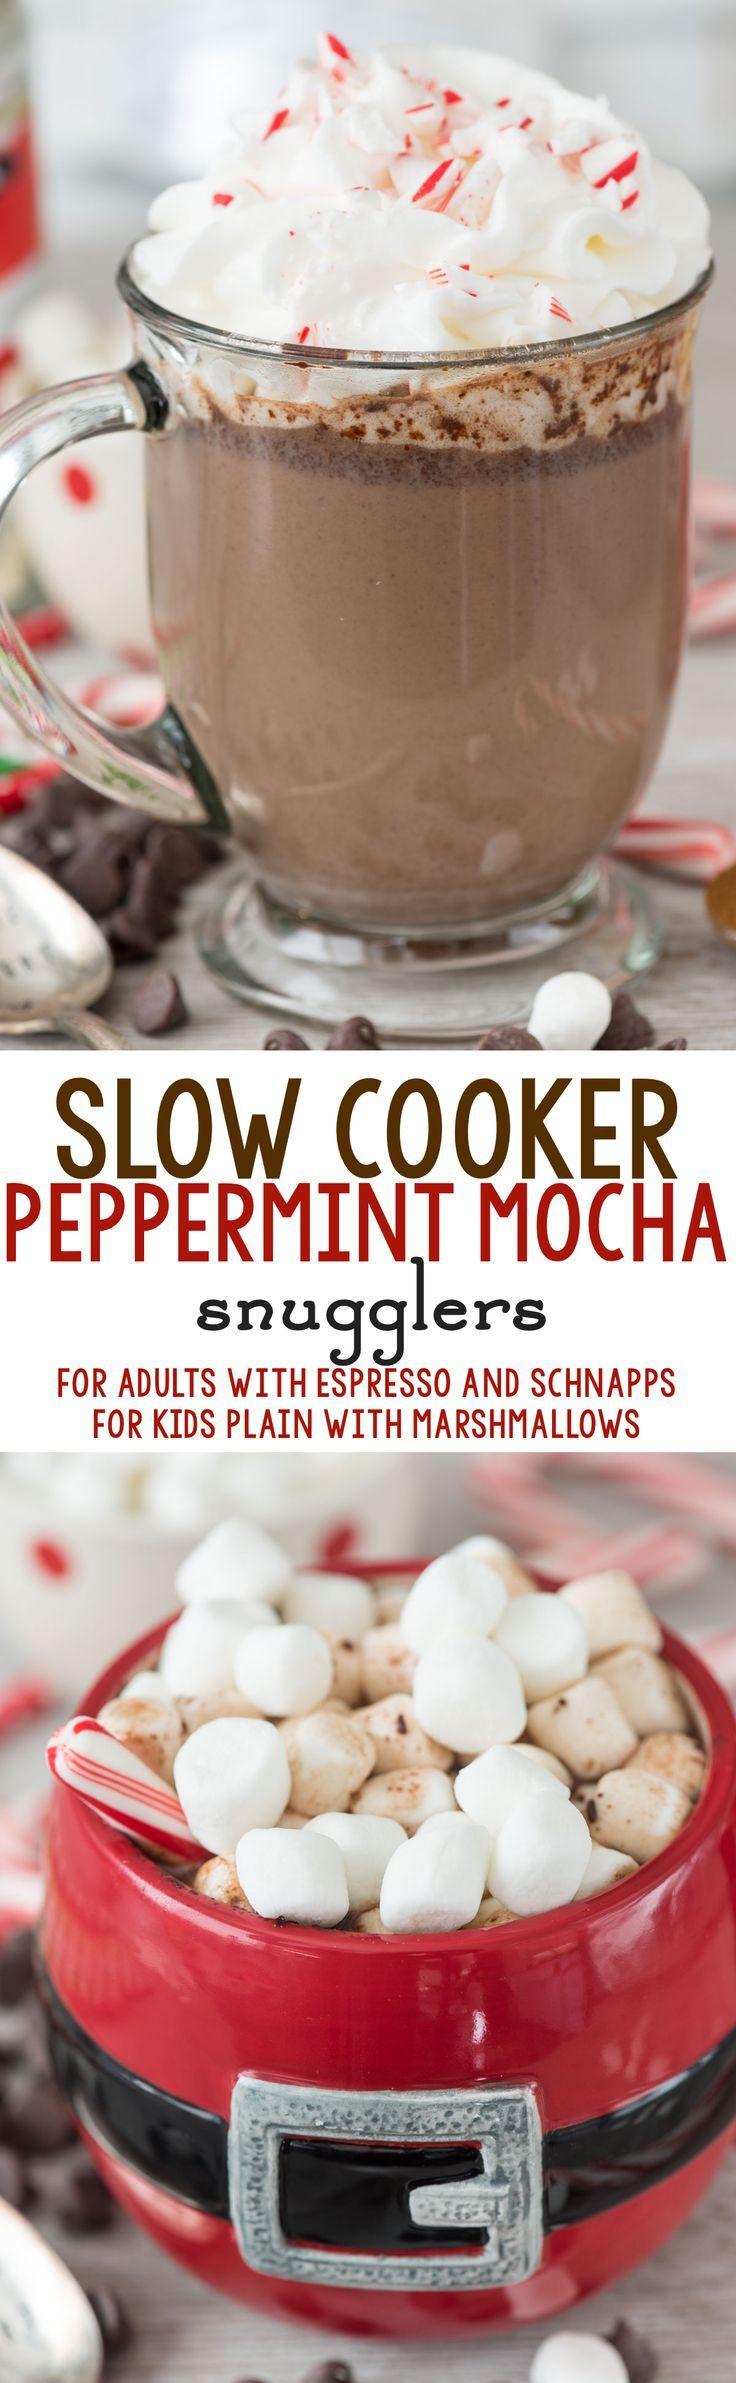 Mariage - Slow Cooker Peppermint Mocha Snugglers